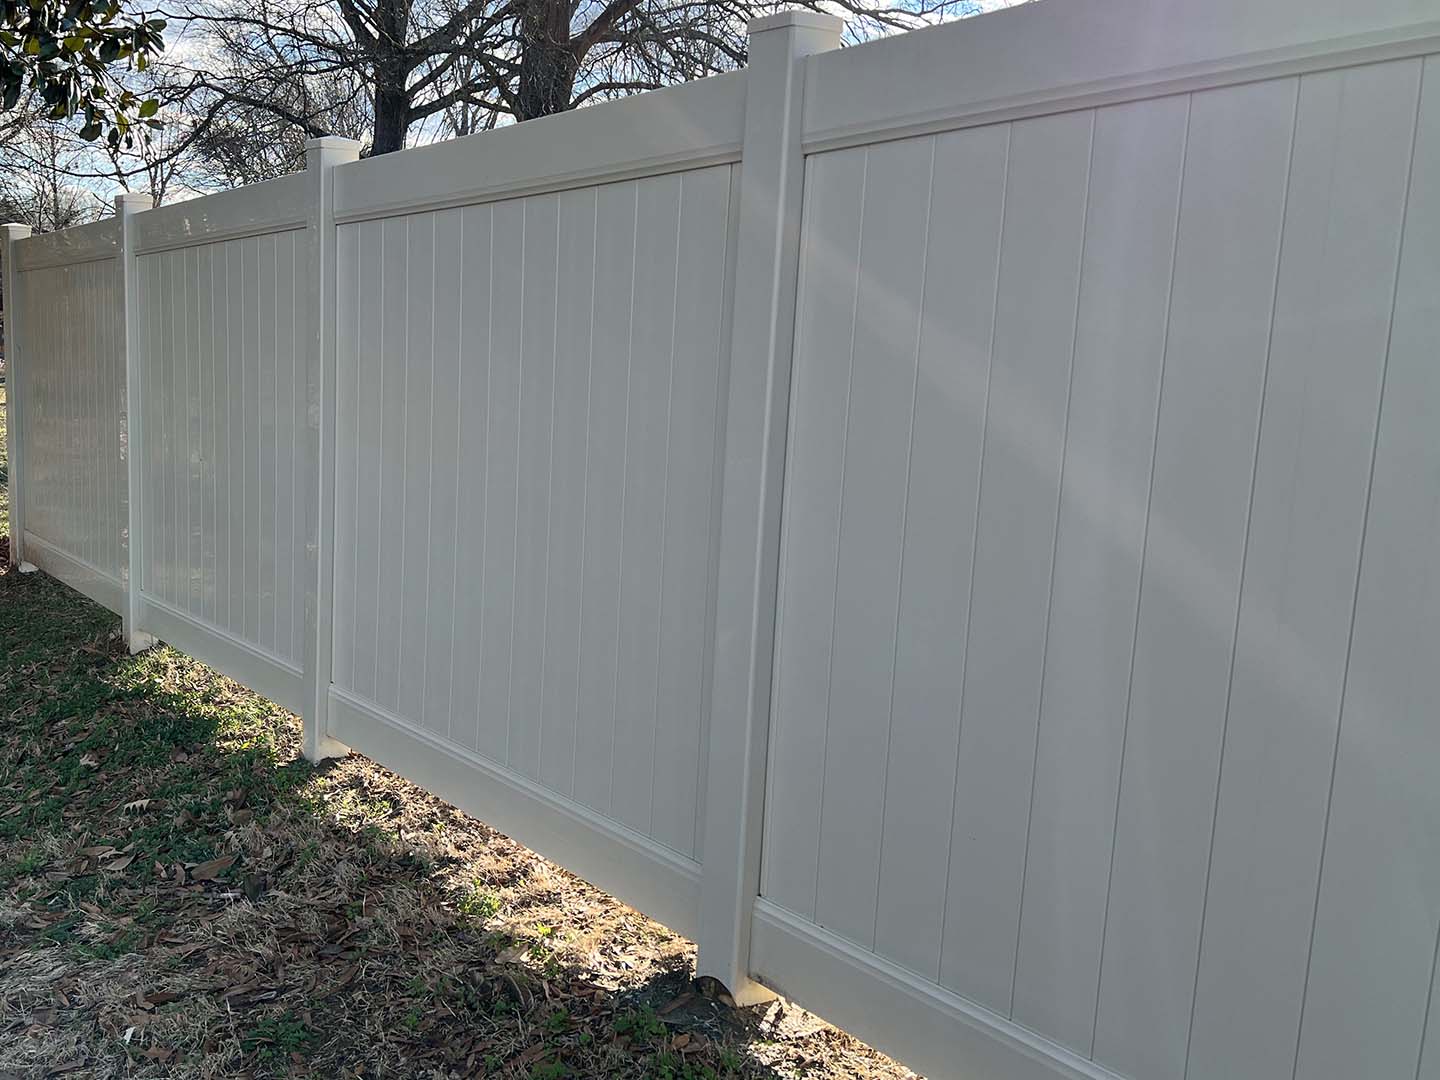  Martin Tennessee Fence Project Photo